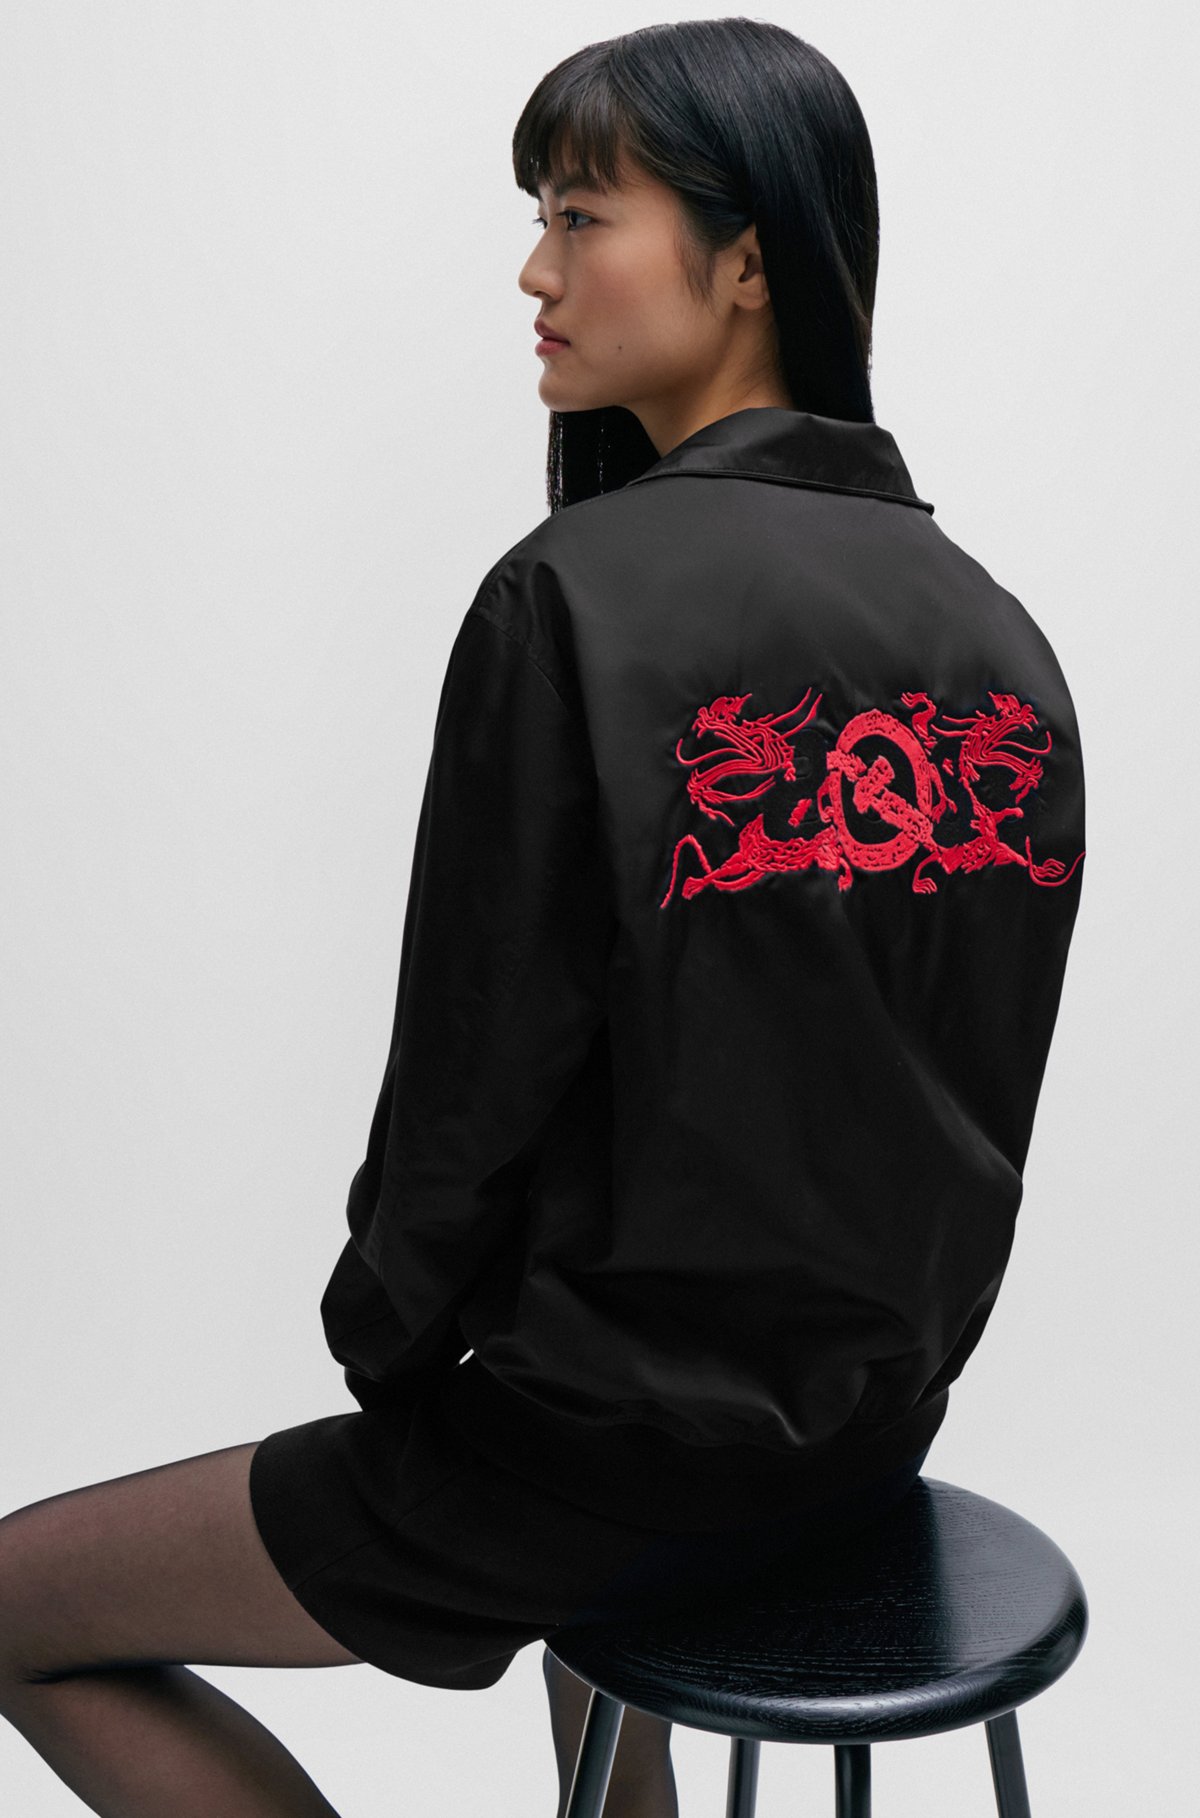 Satin jacket in a regular fit with special artwork, Black